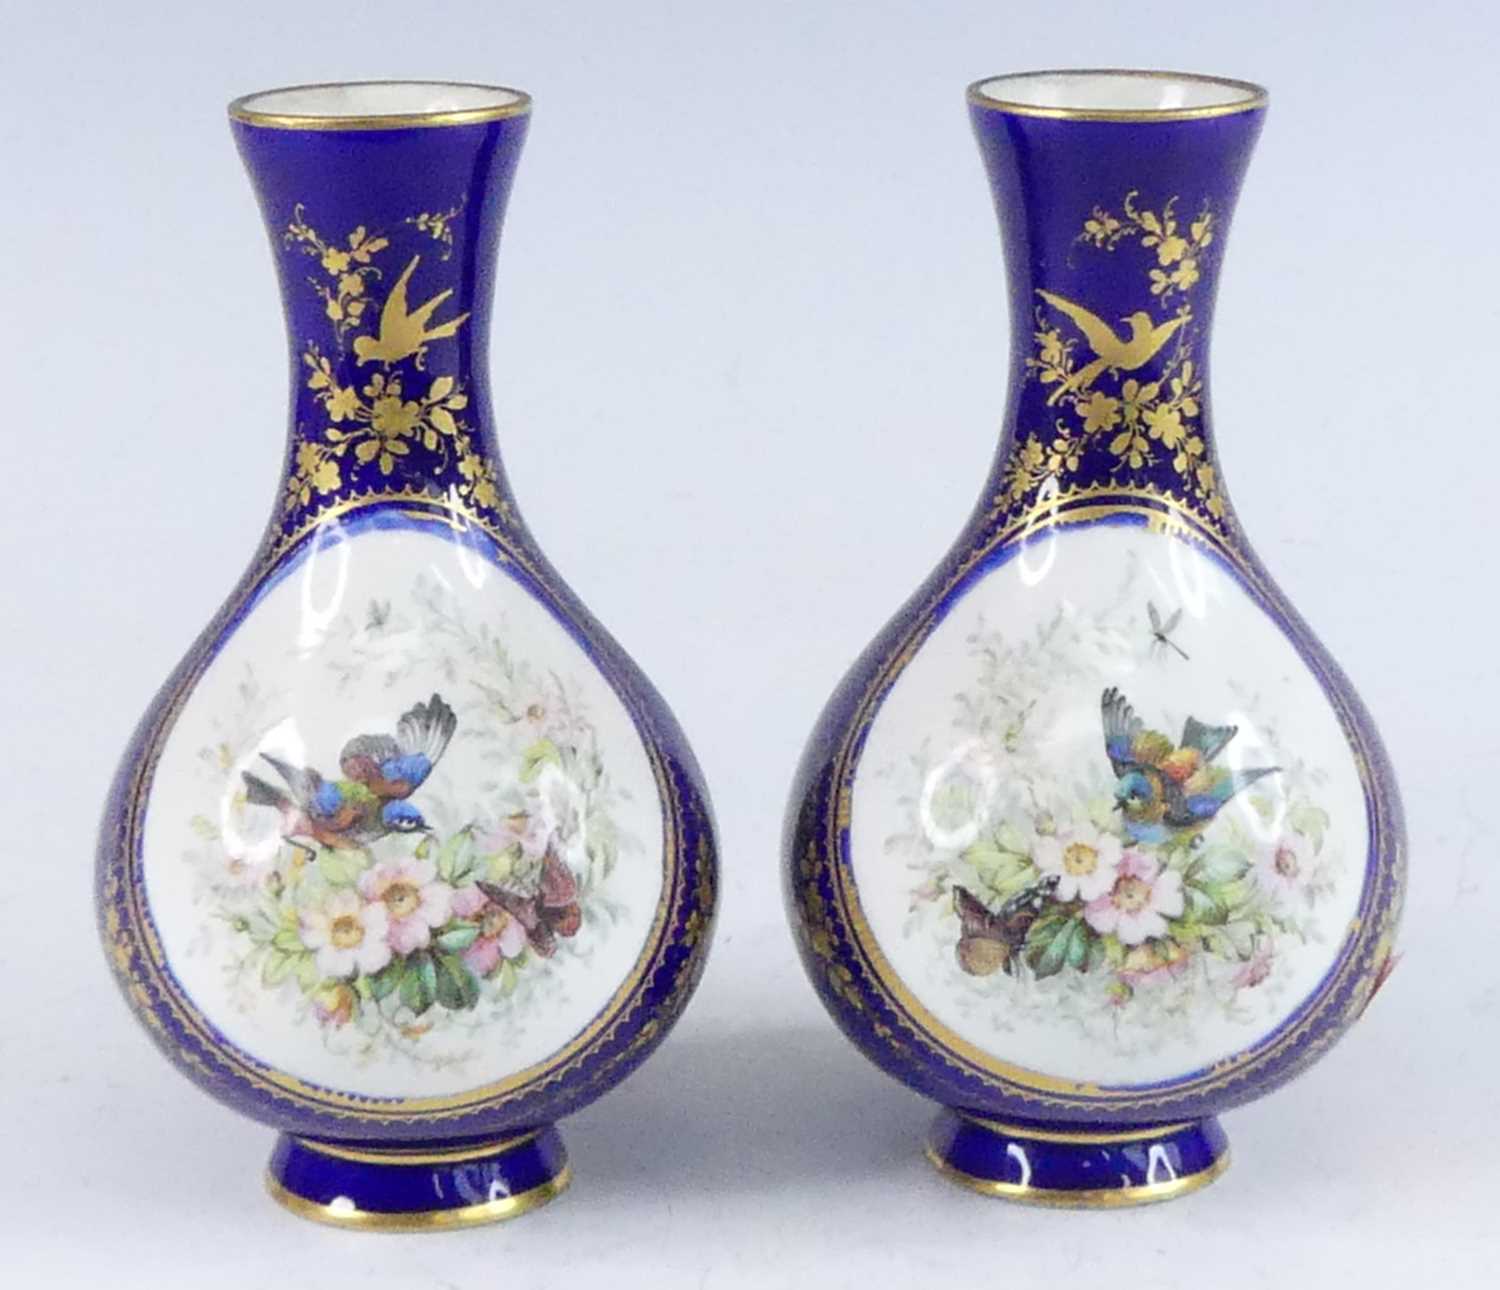 A pair of Sevres porcelain vases, 19th century, each decorated with children in 18th century dress - Image 4 of 9